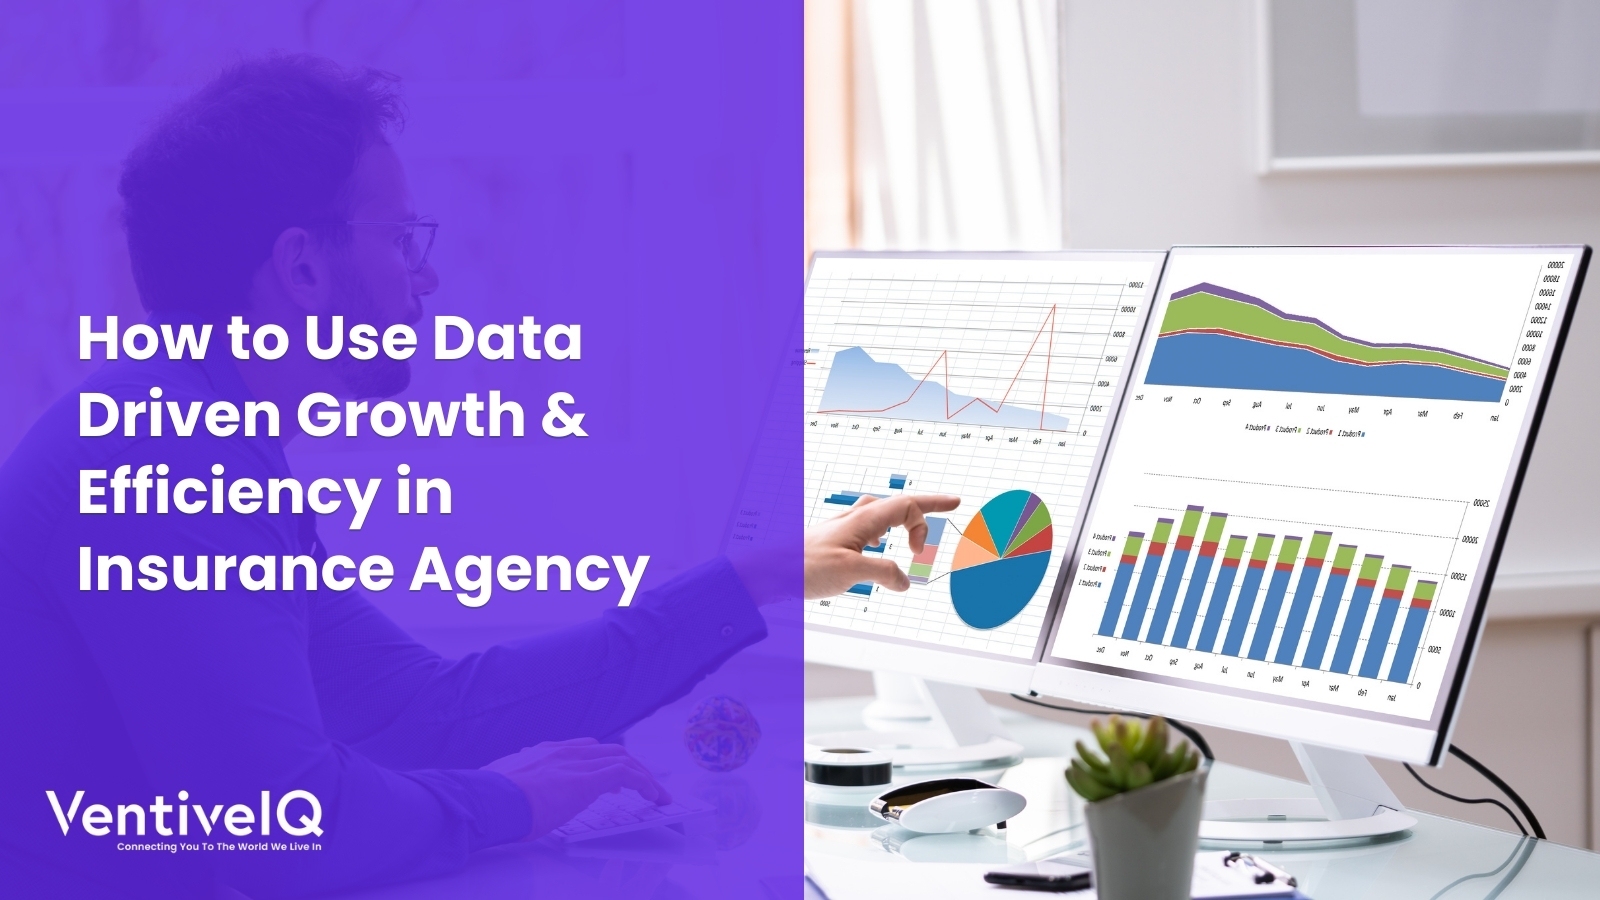 How to Use Data Driven Growth & Efficiency in Insurance Agency